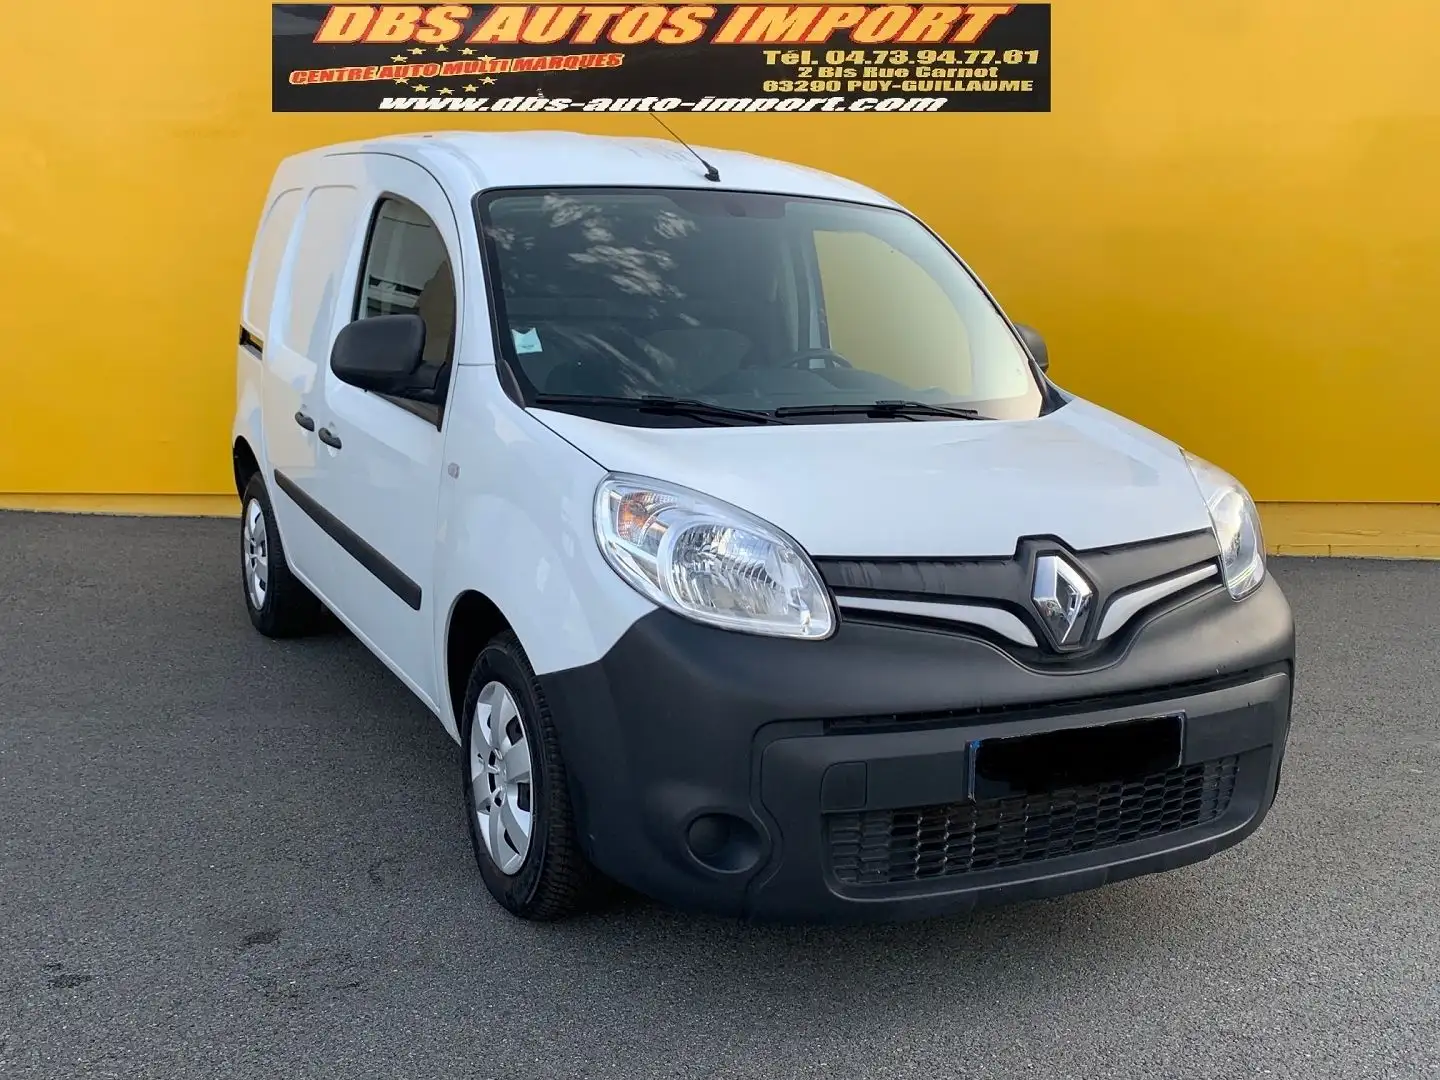 Renault Express 1.5 DCI 90CH ENERGY GRAND CONFORT EURO6 - 1